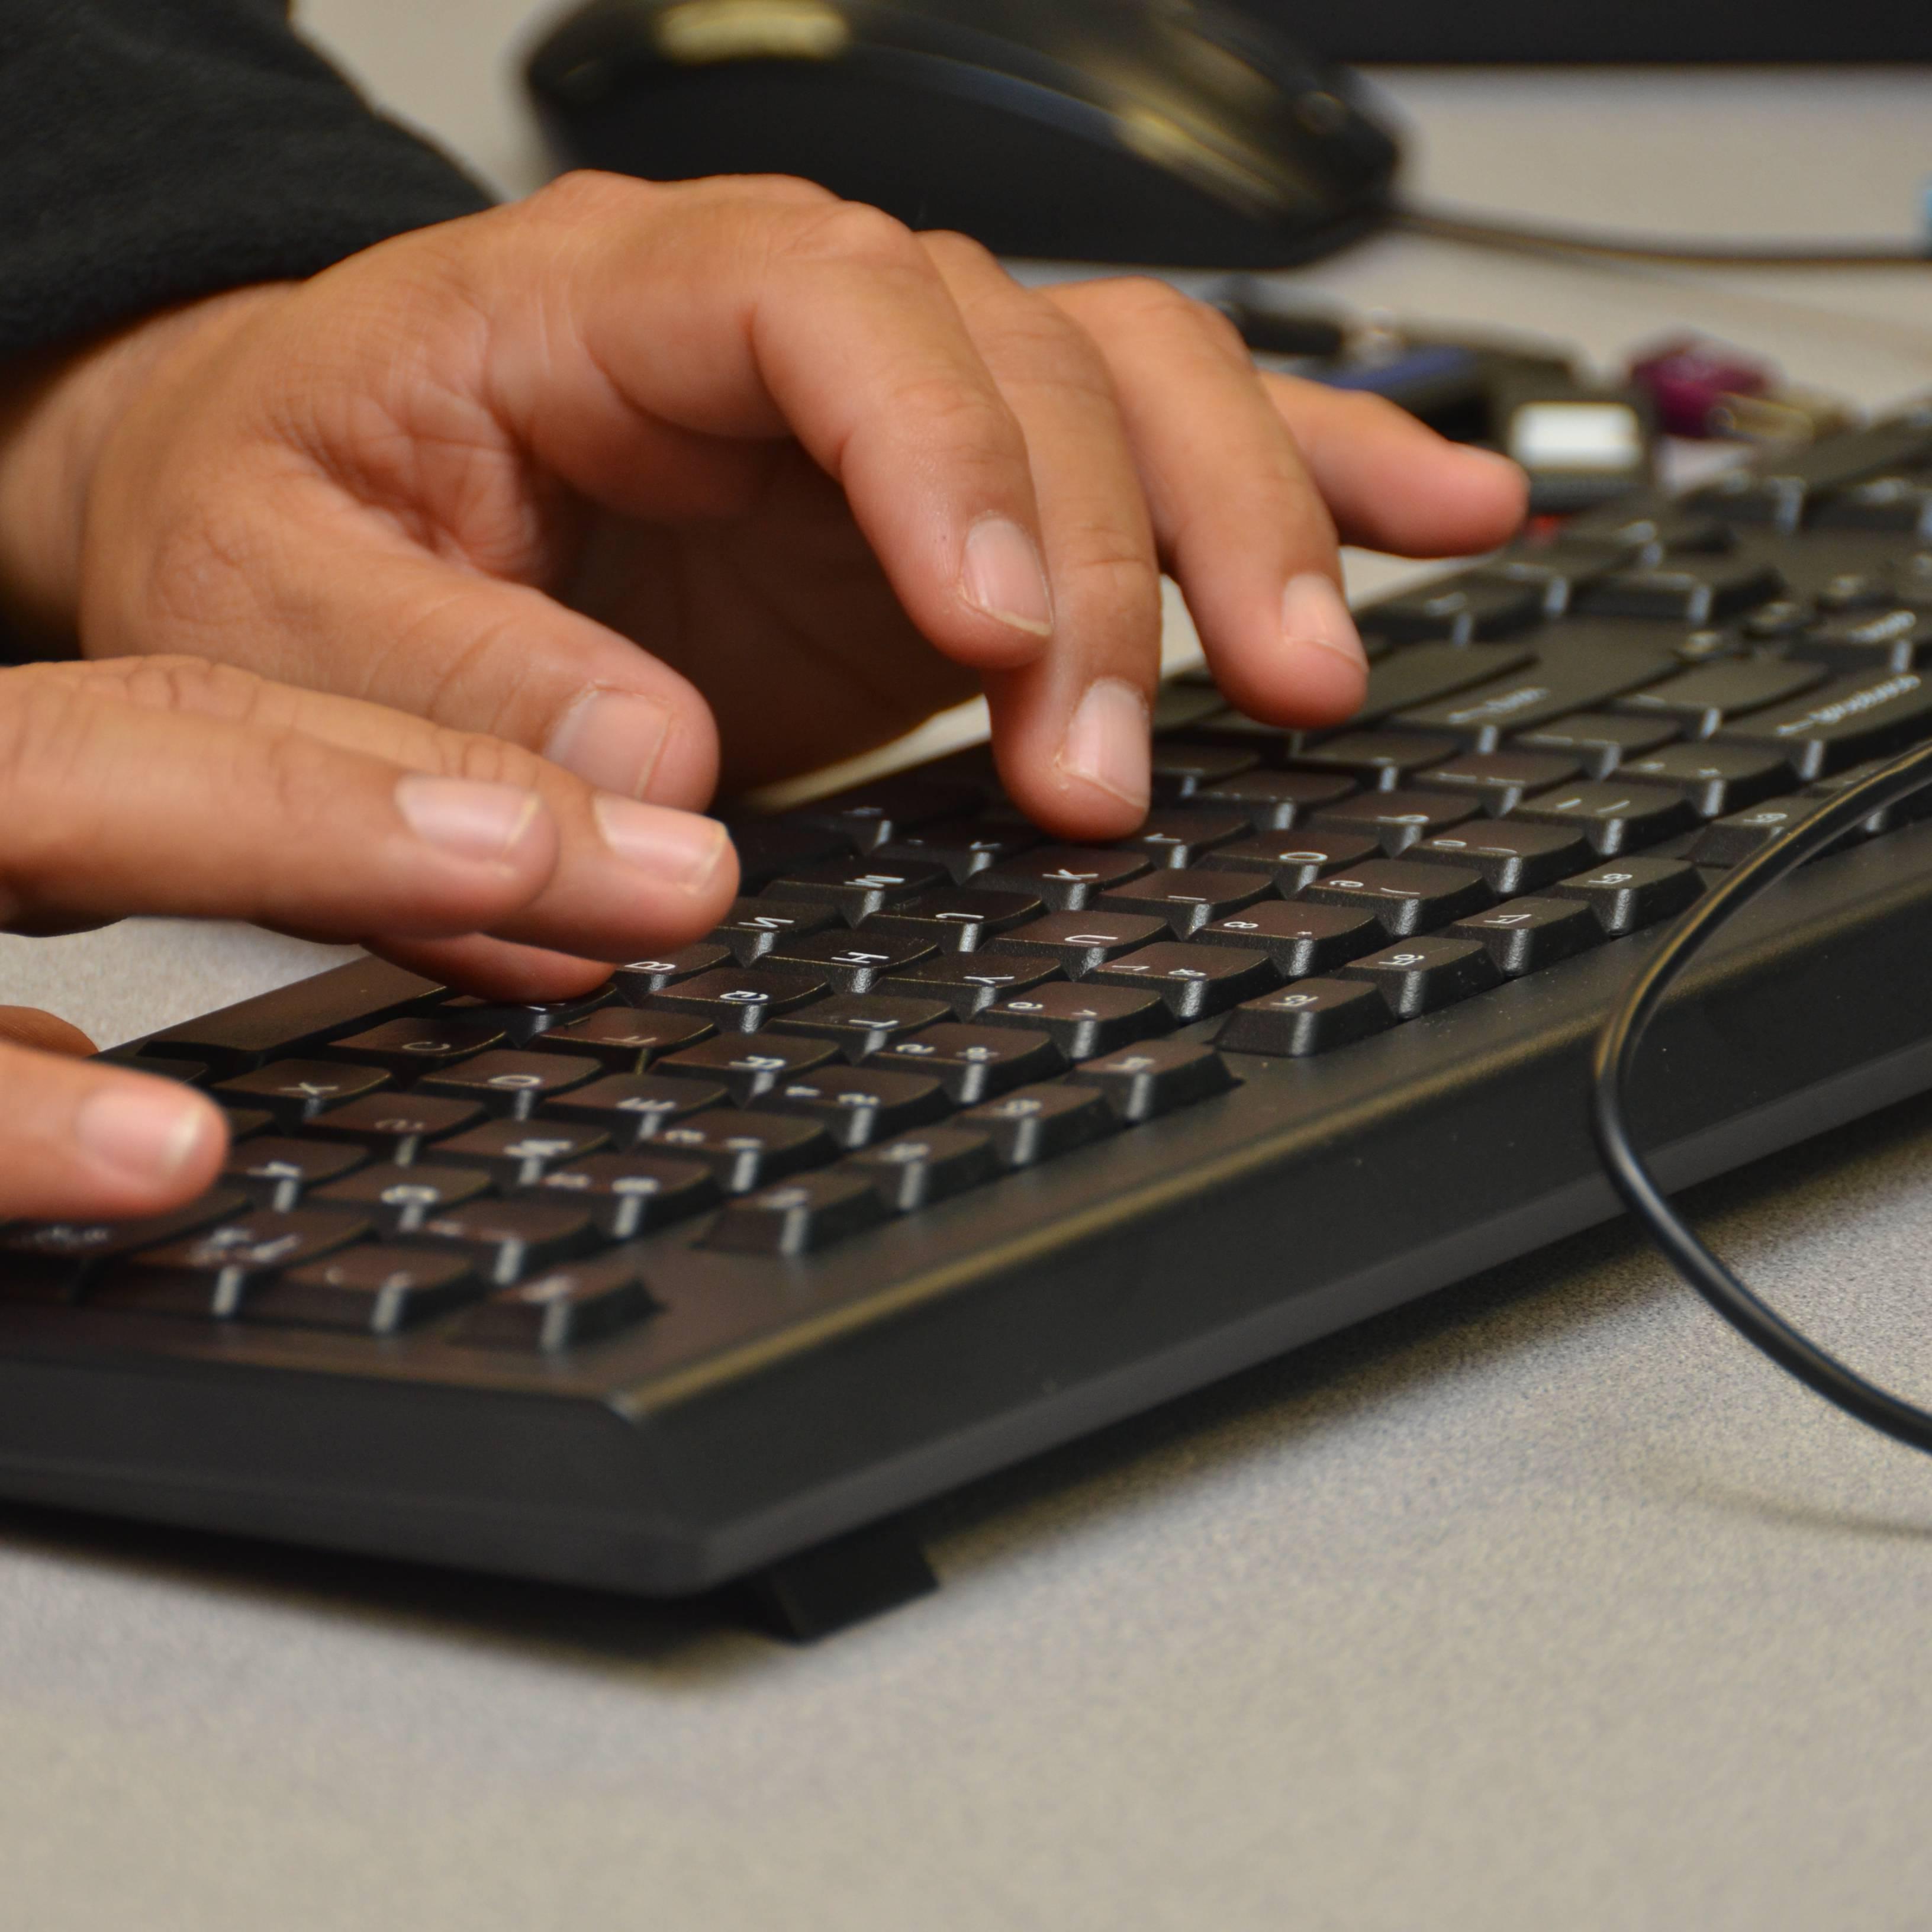 person typing on a keyboard